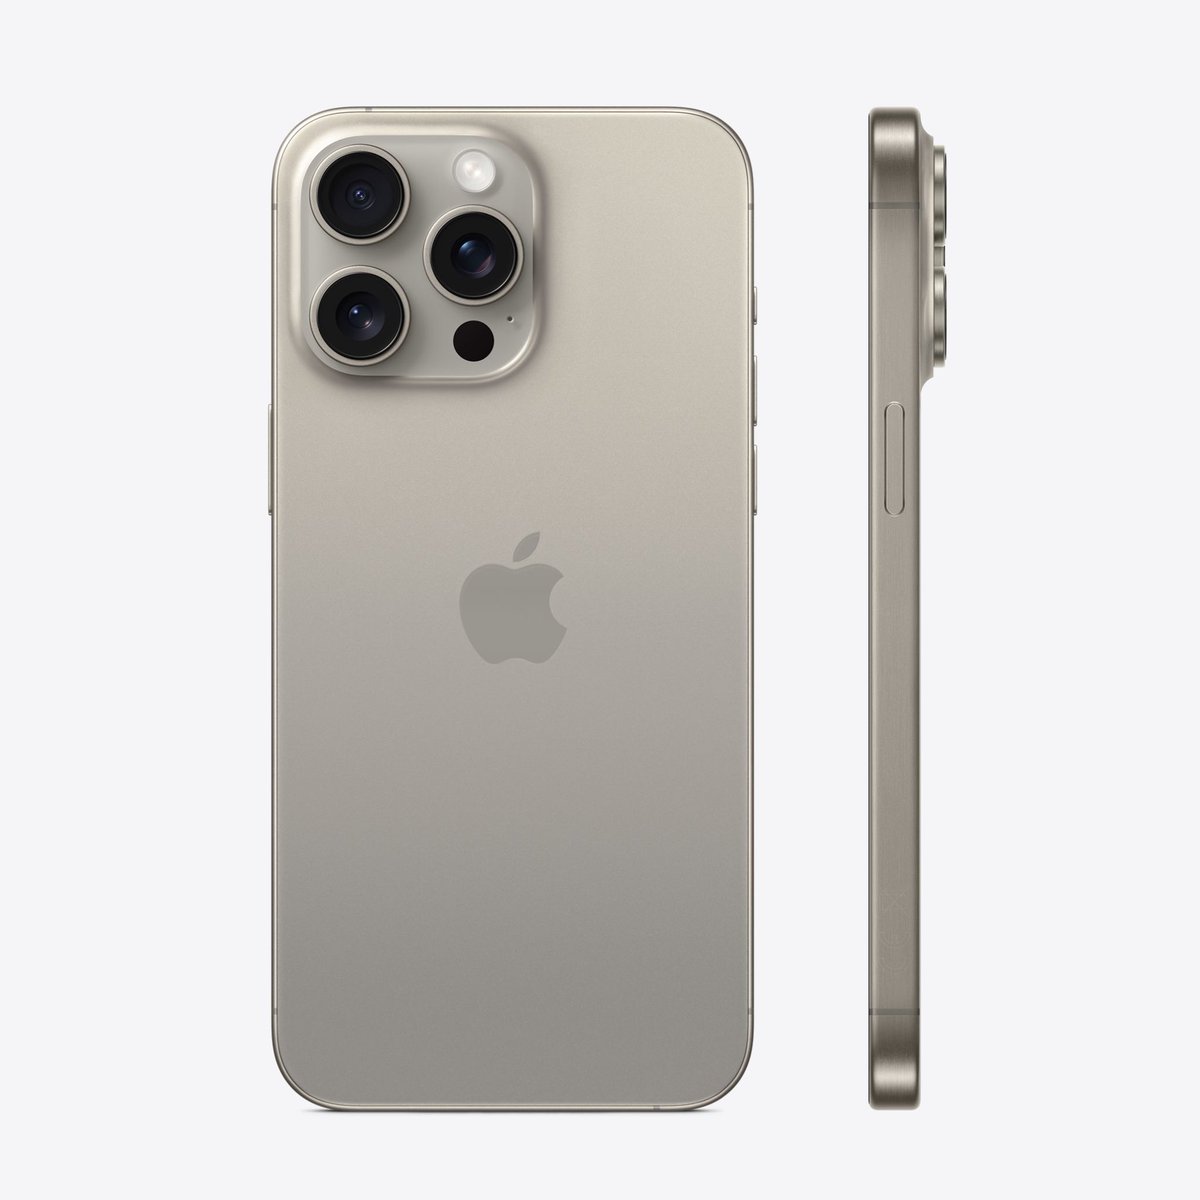 The iPhone 16 Pro might have new polished titanium sides 🤩 This may look similar to iPhone 14 Pro’s borders. Do you agree with this change?